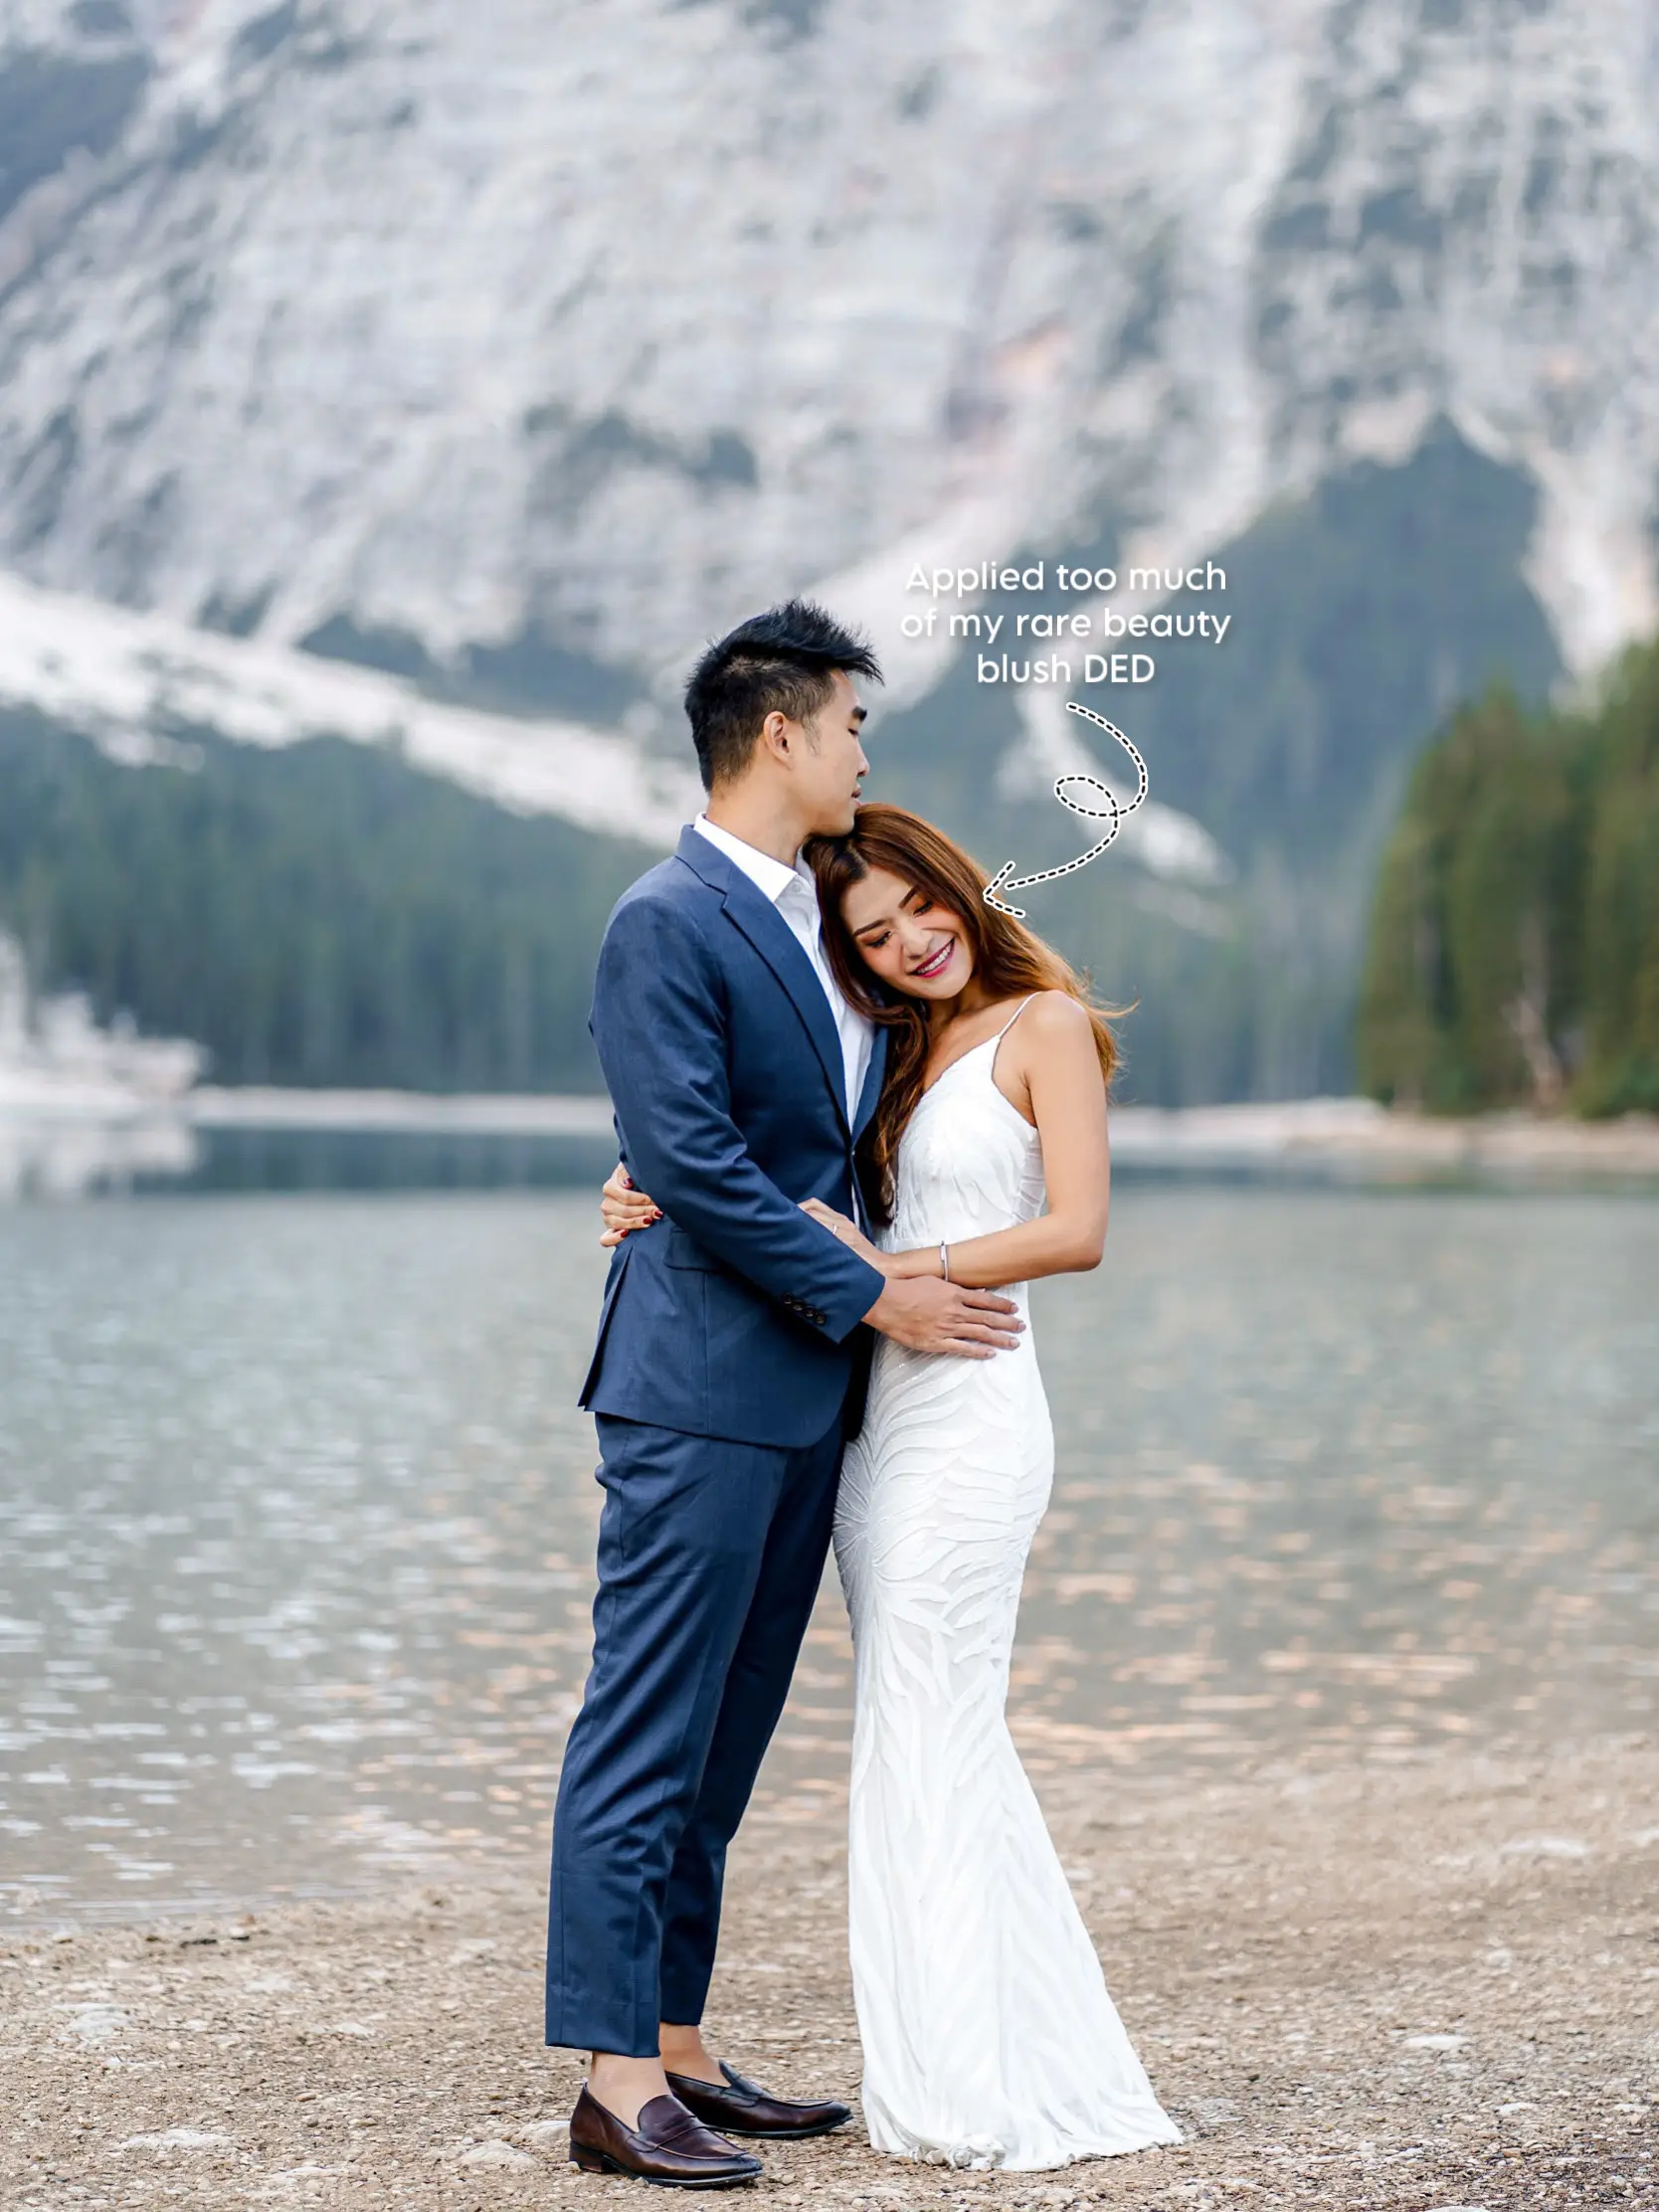 Pre-wedding shoot at UNESCO Heritage Site ⛰️✨'s images(2)